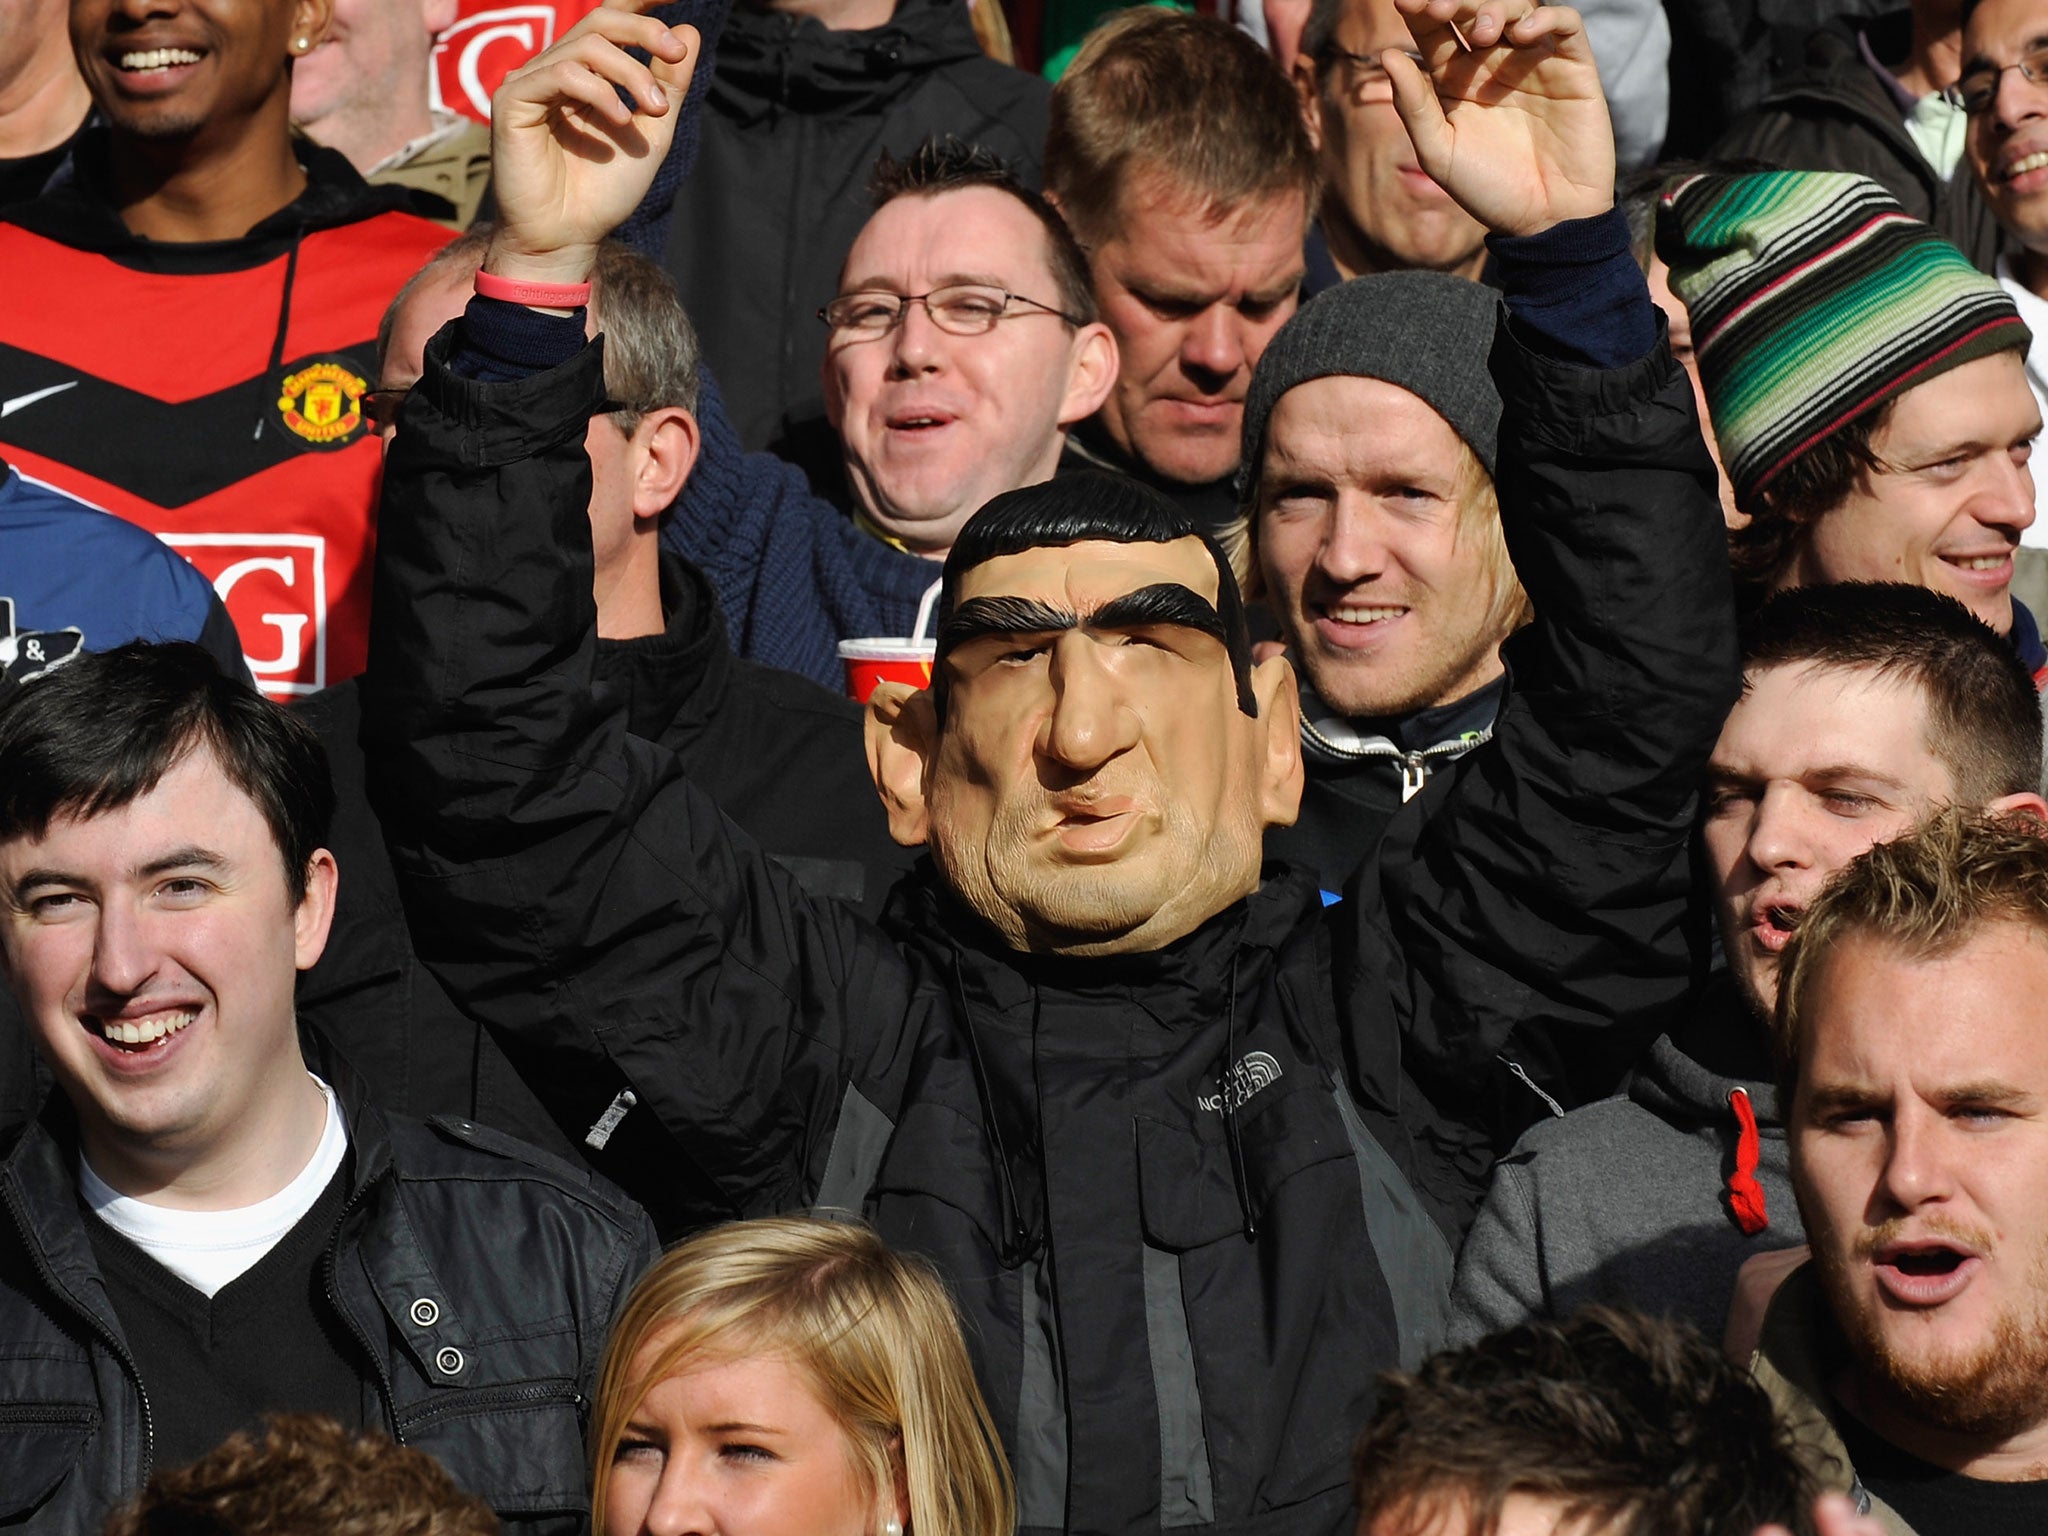 A Manchester United supporter is spotted in the crowd wearing an Eric Cantona mask